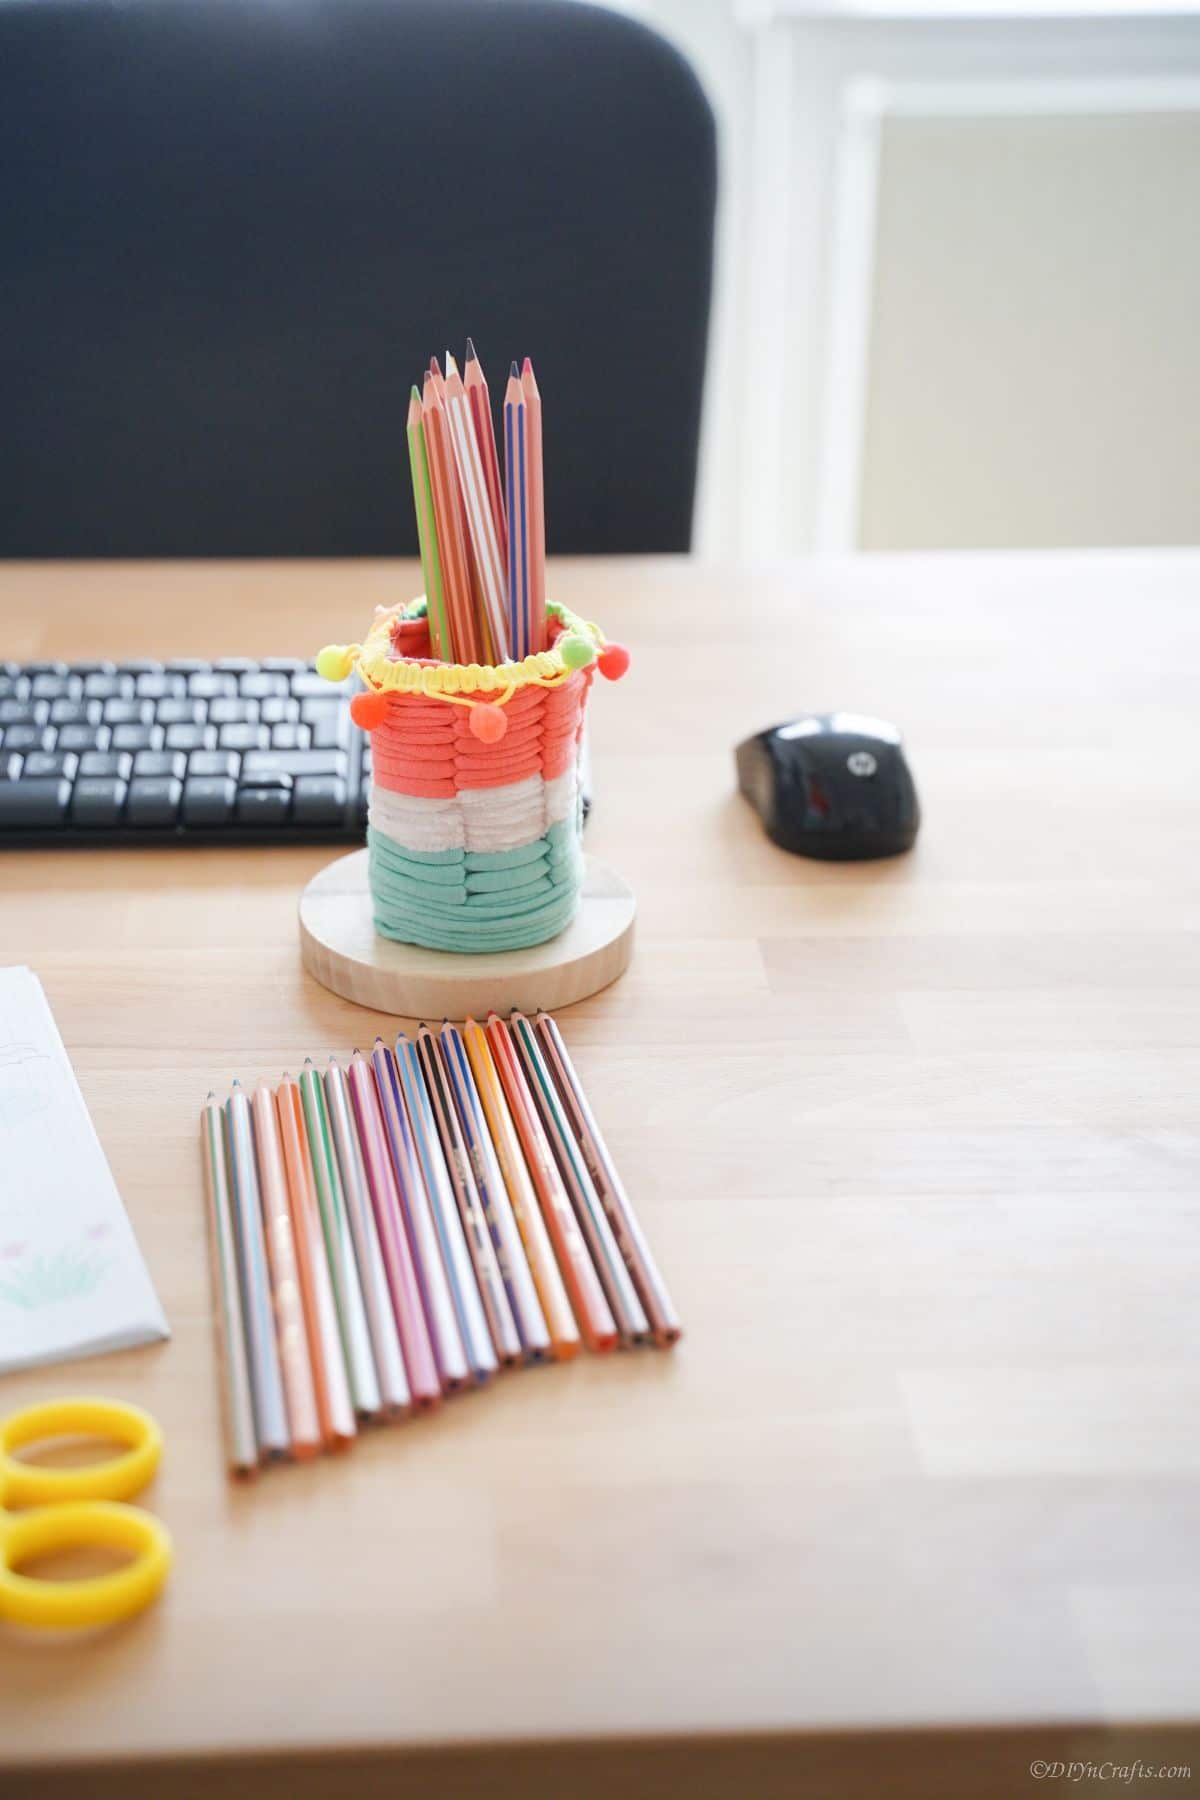 striped yarn pencil cup on desk by black keyboard and mouse